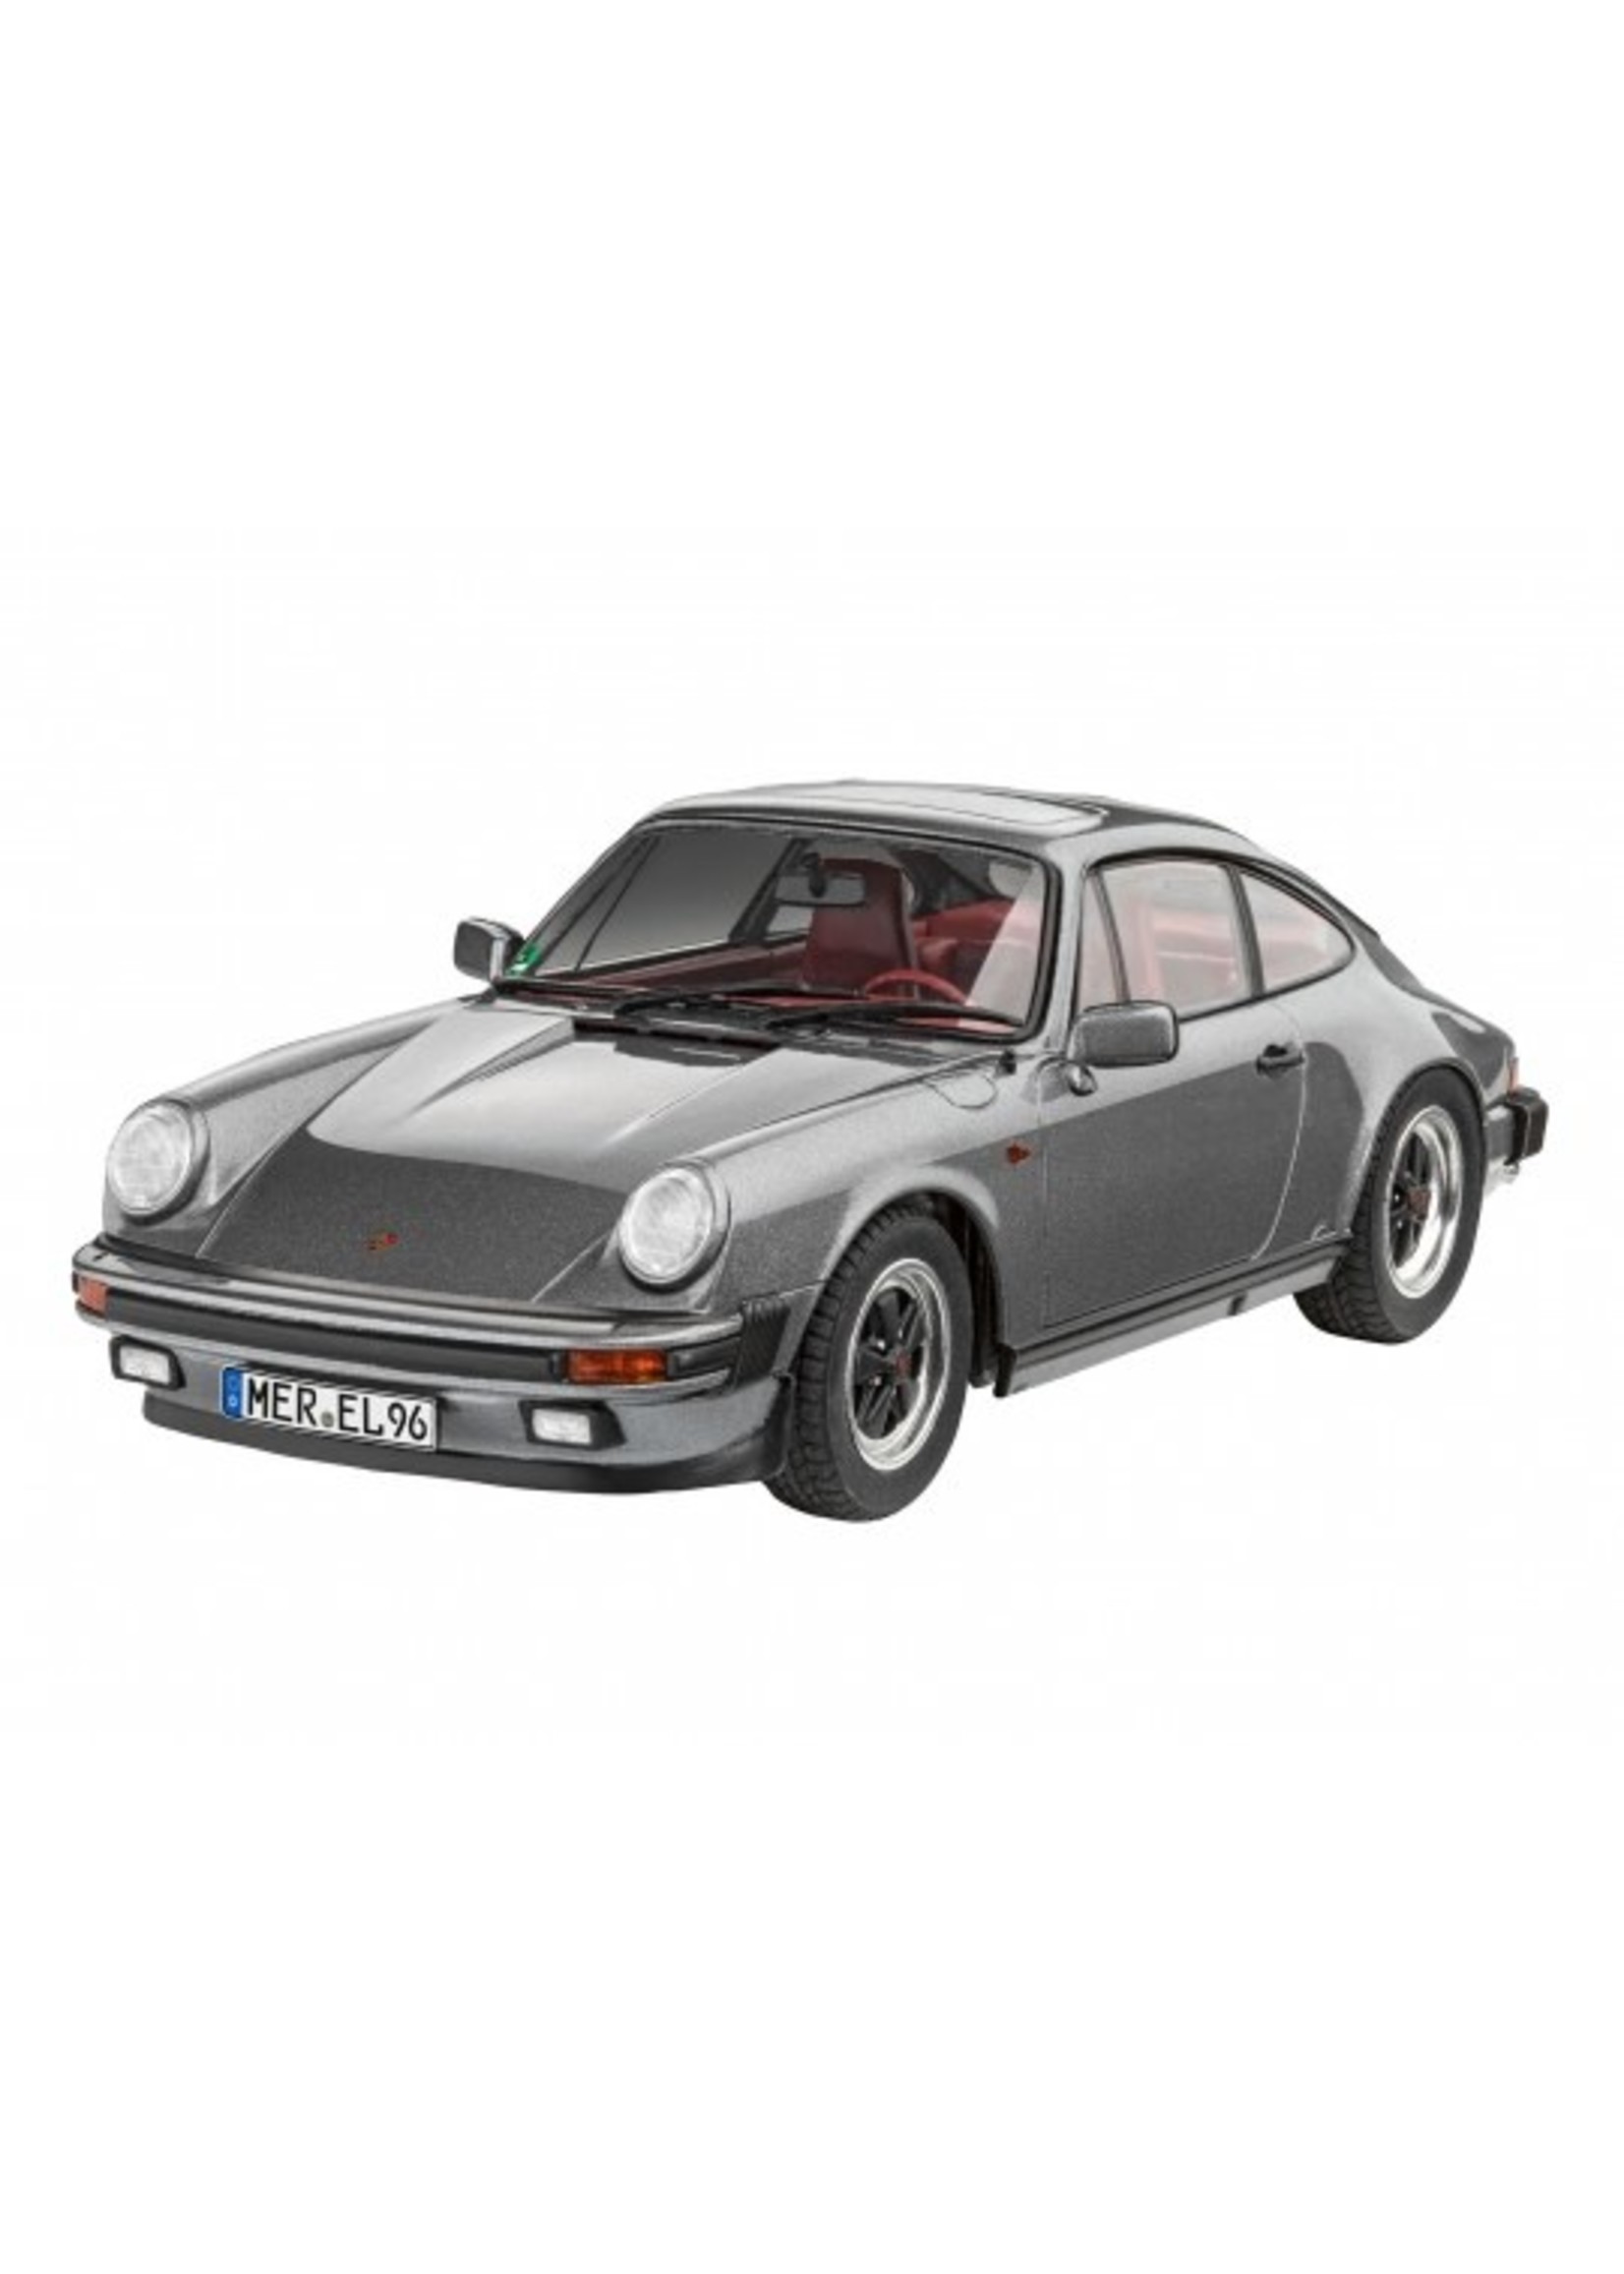 Revell of Germany 07688 - 1/24 Porsche 911 Carrera 3.2 Coupe